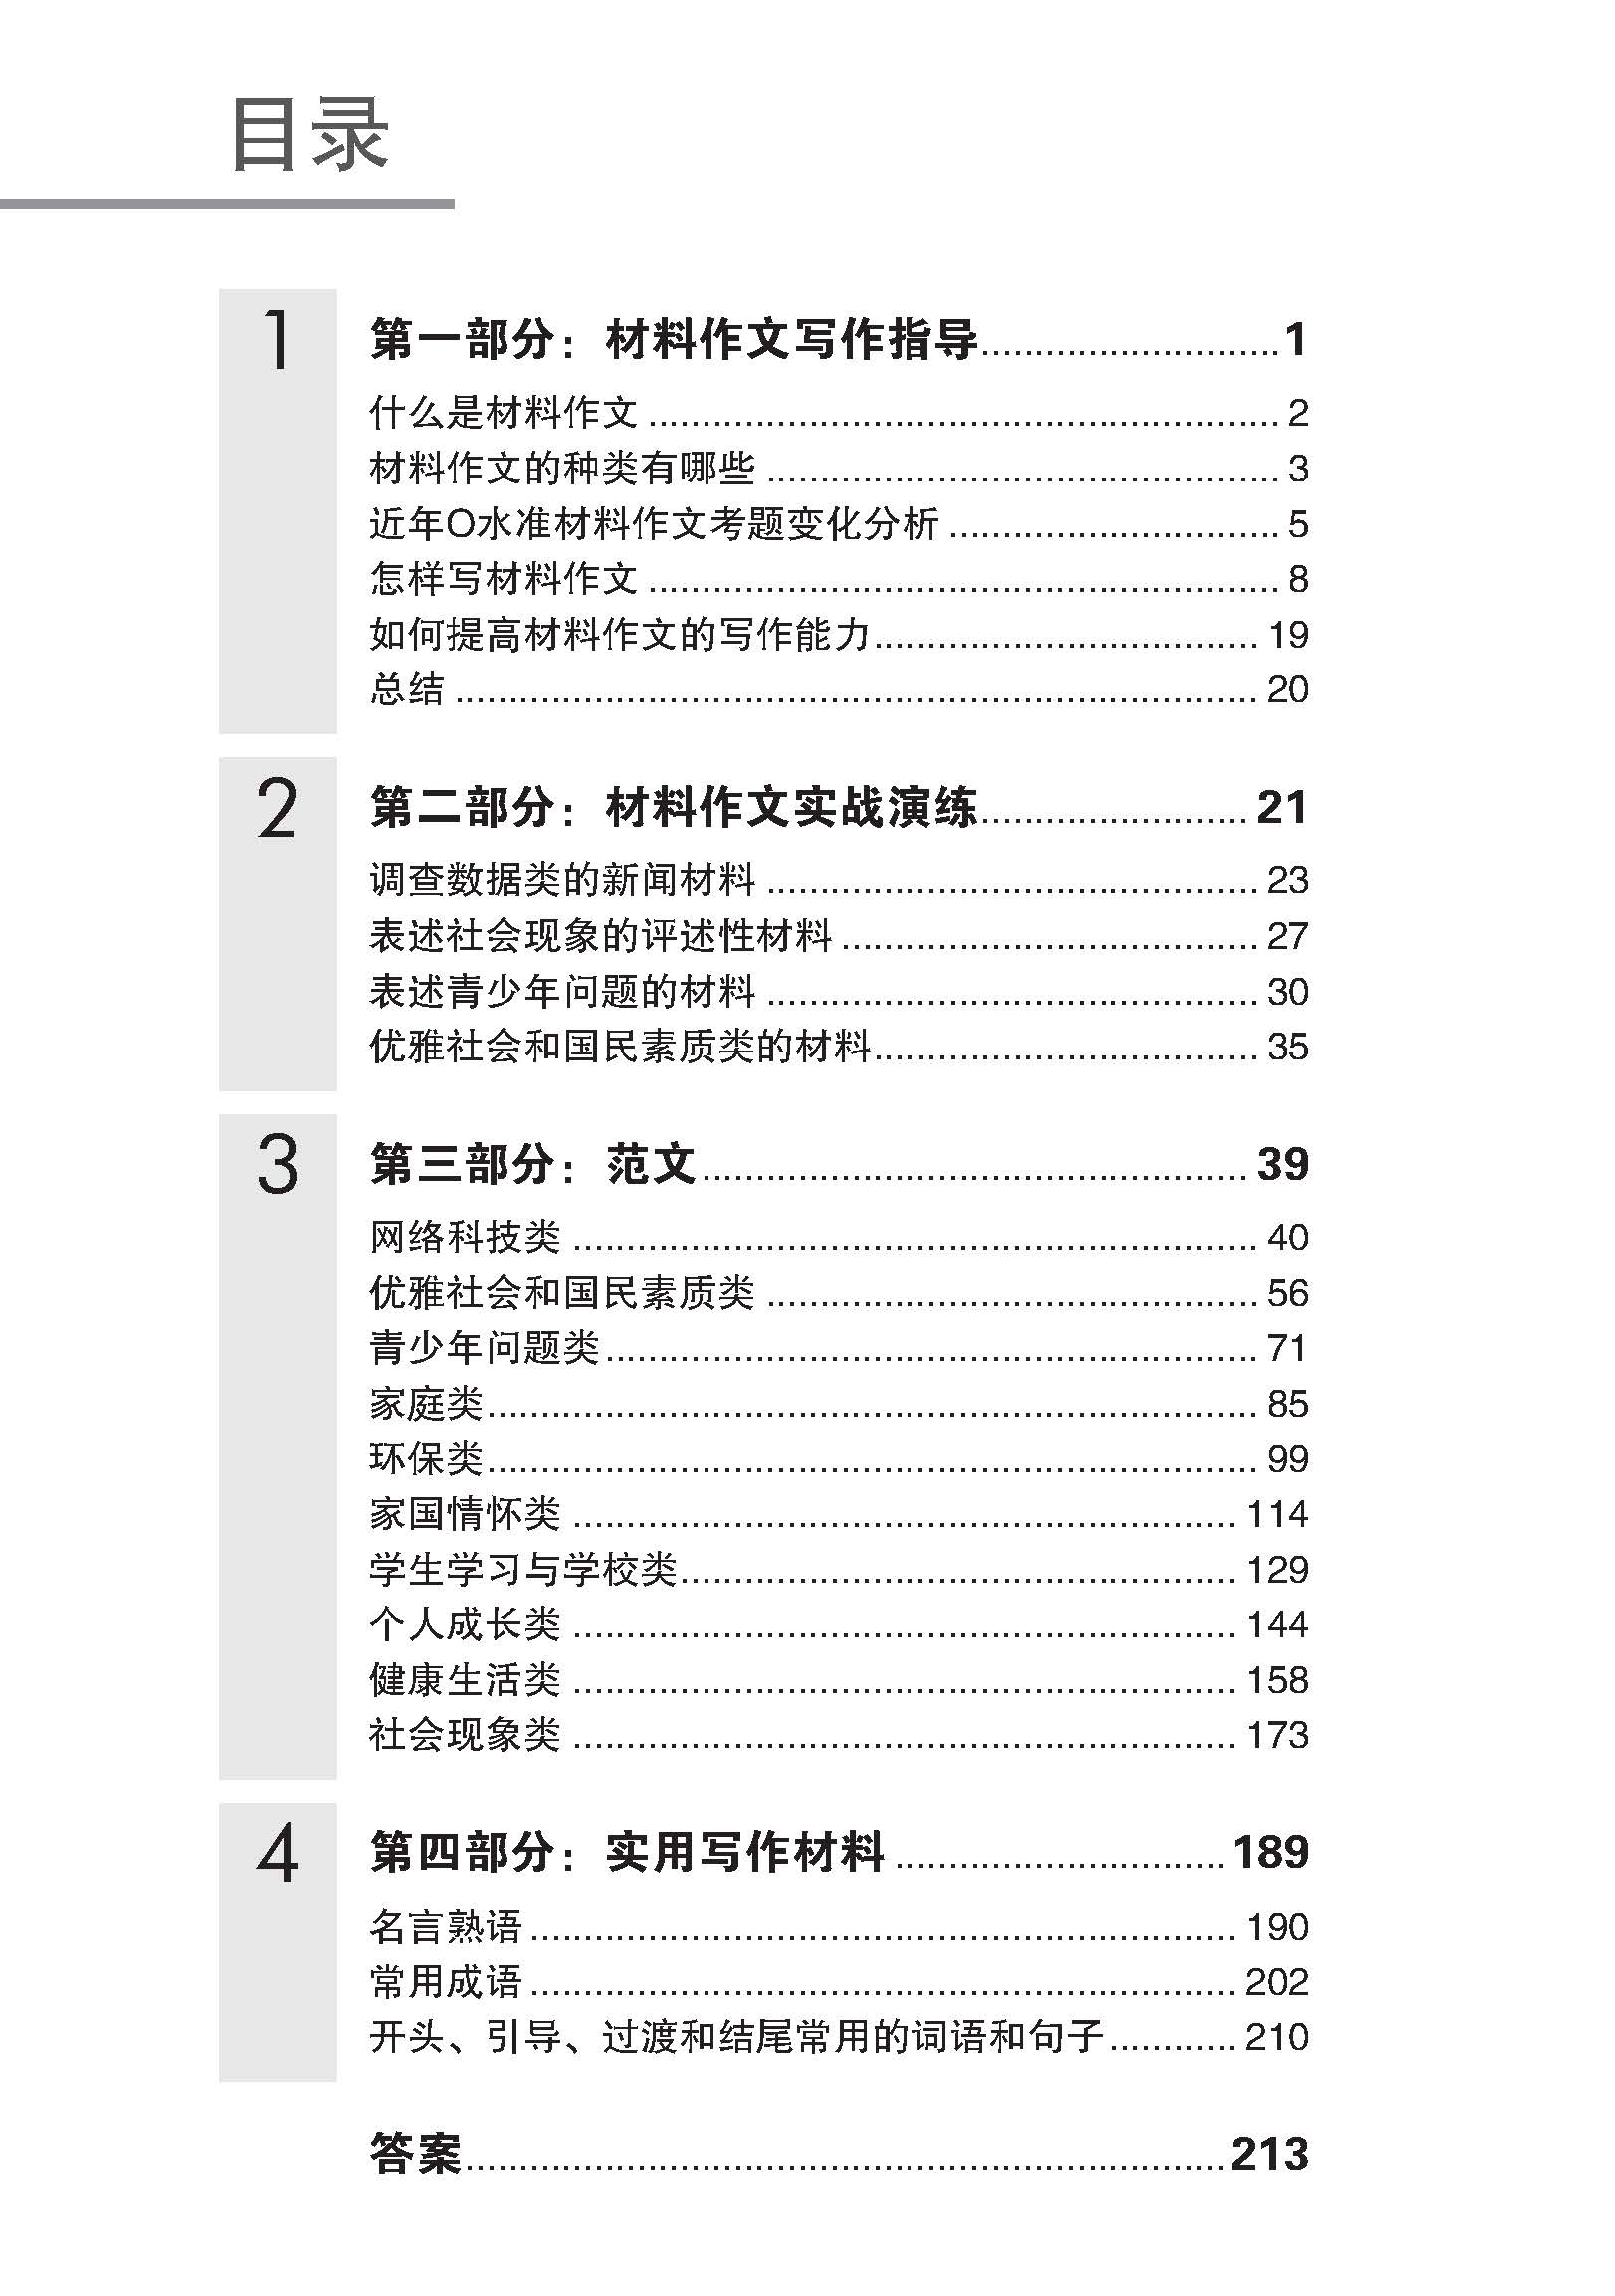 O Level Chinese Material Review of Popular Topics - _MS, CHINESE, EDUCATIONAL PUBLISHING HOUSE, INTERMEDIATE, O LEVEL